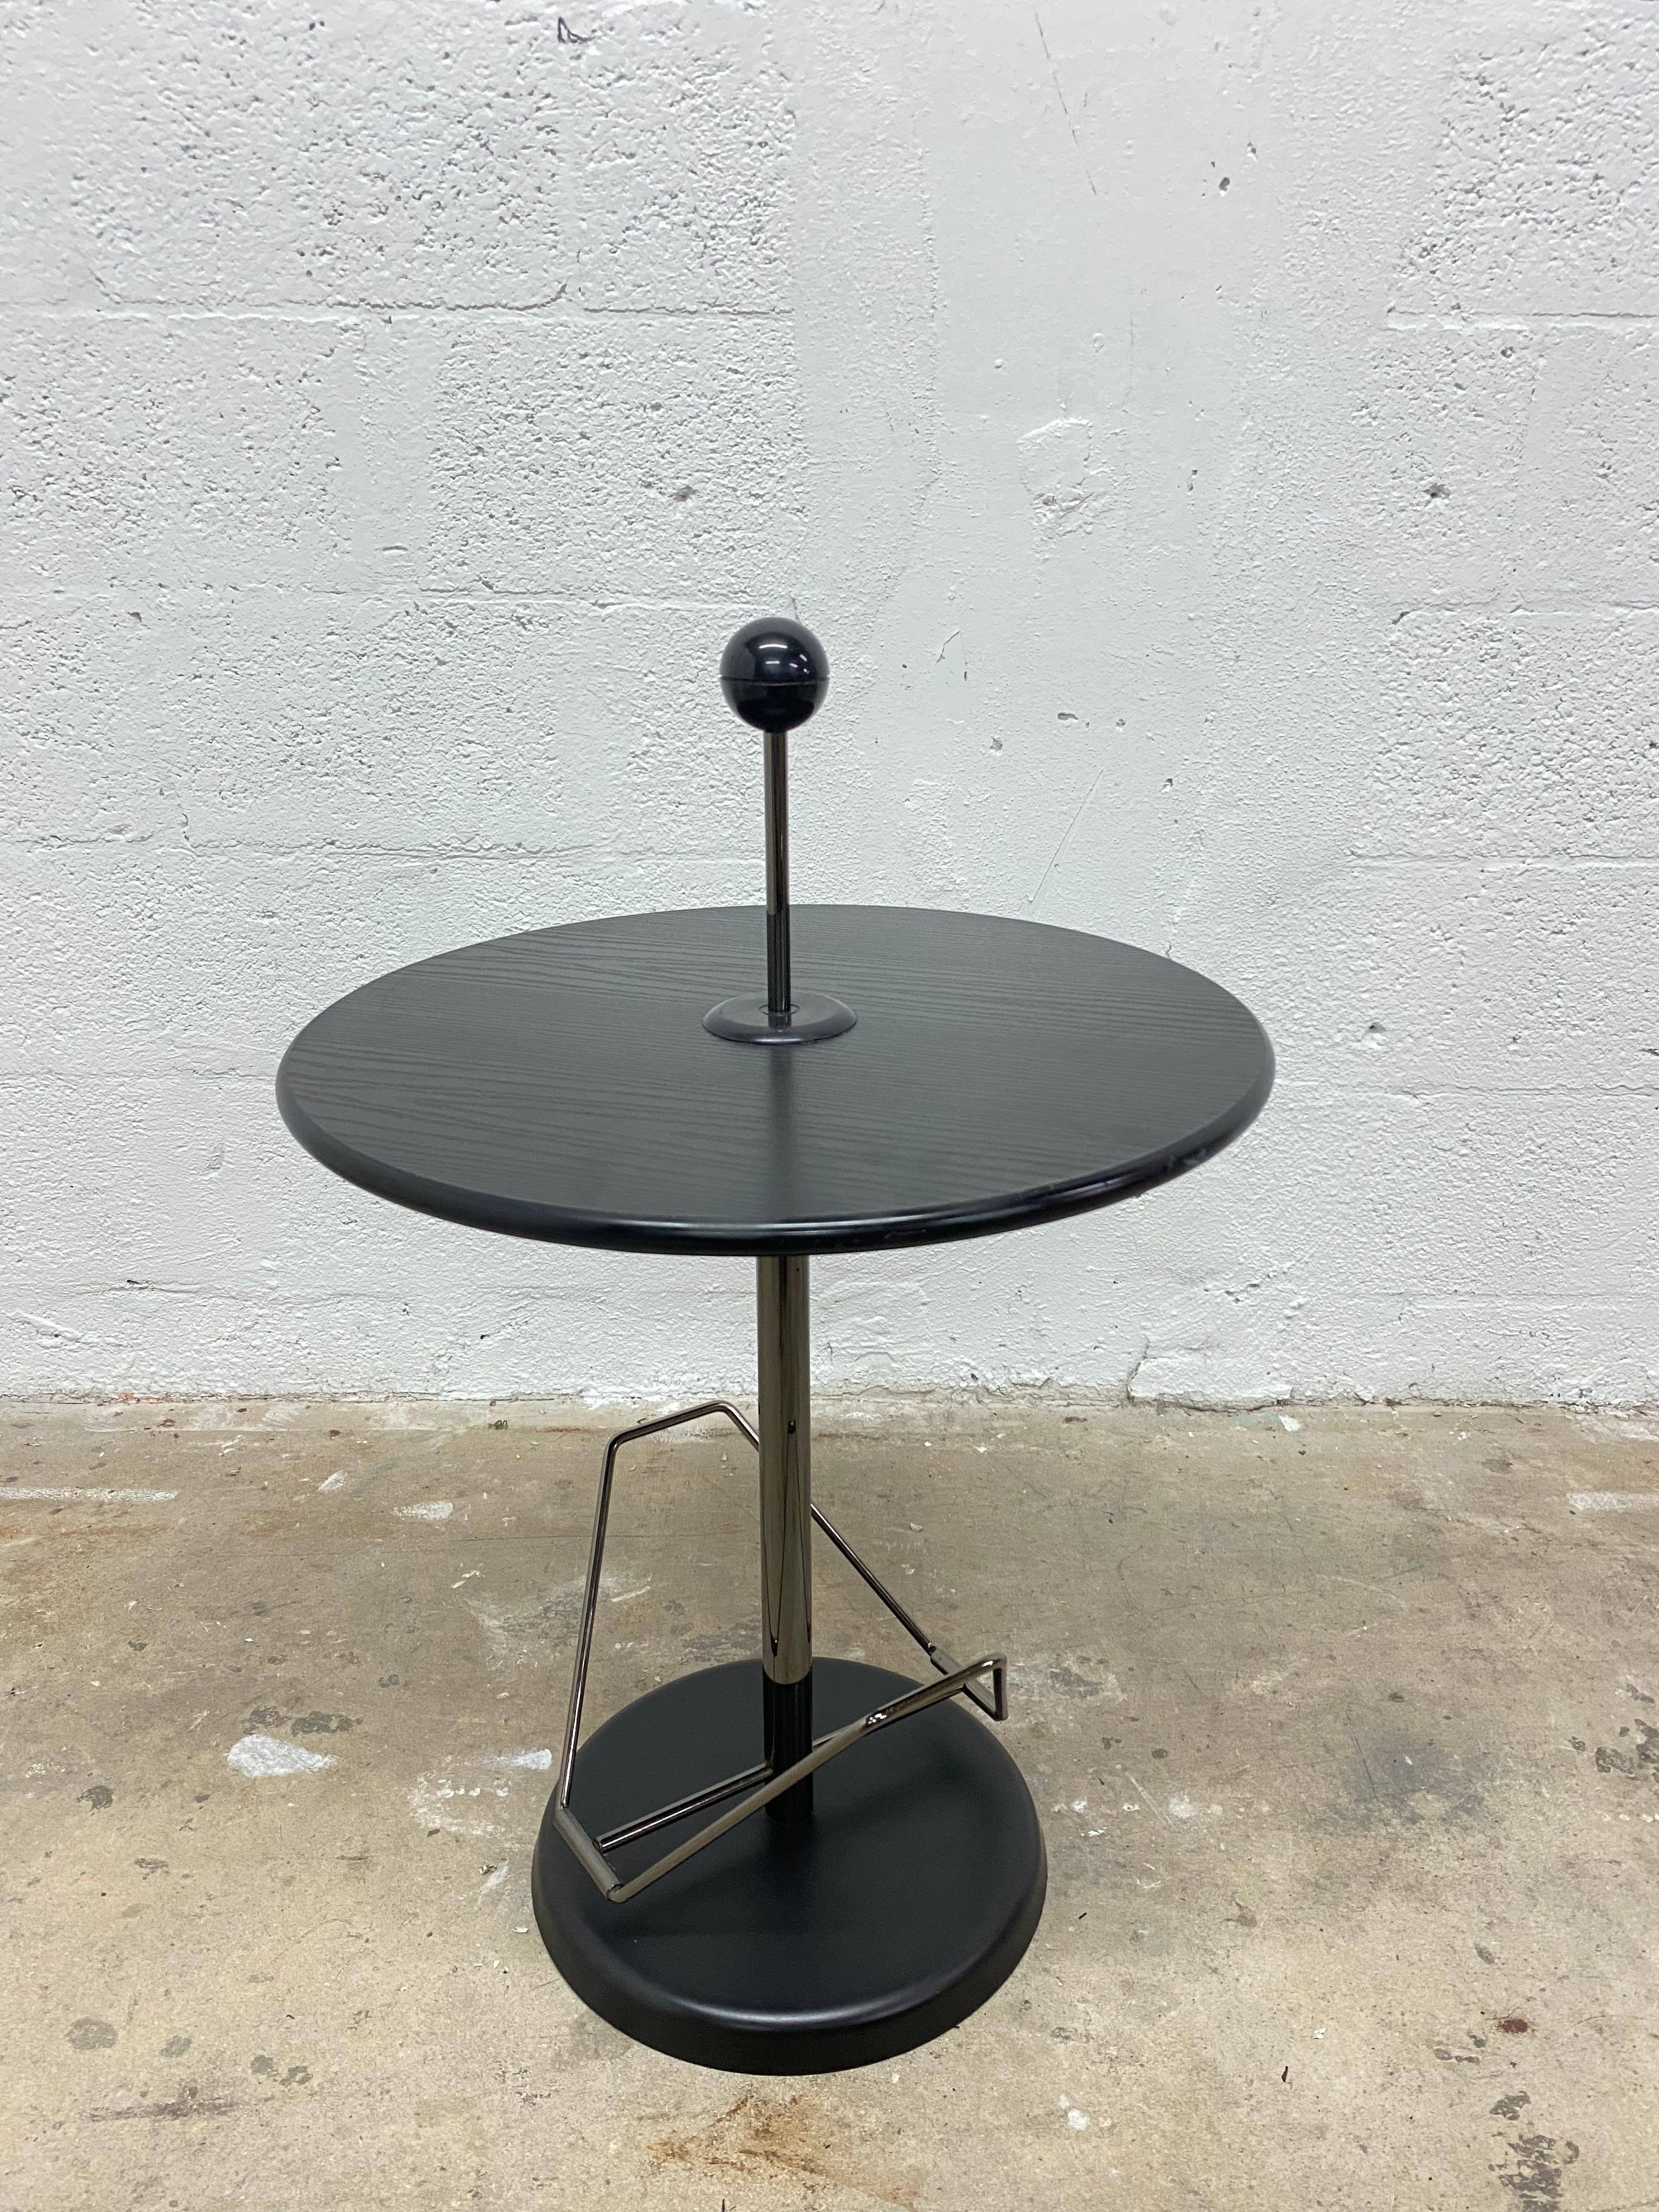 Circular, post-modern contemporary black side table with tubular gunmetal steel magazine holder and center shaft with knob from the 1980s.